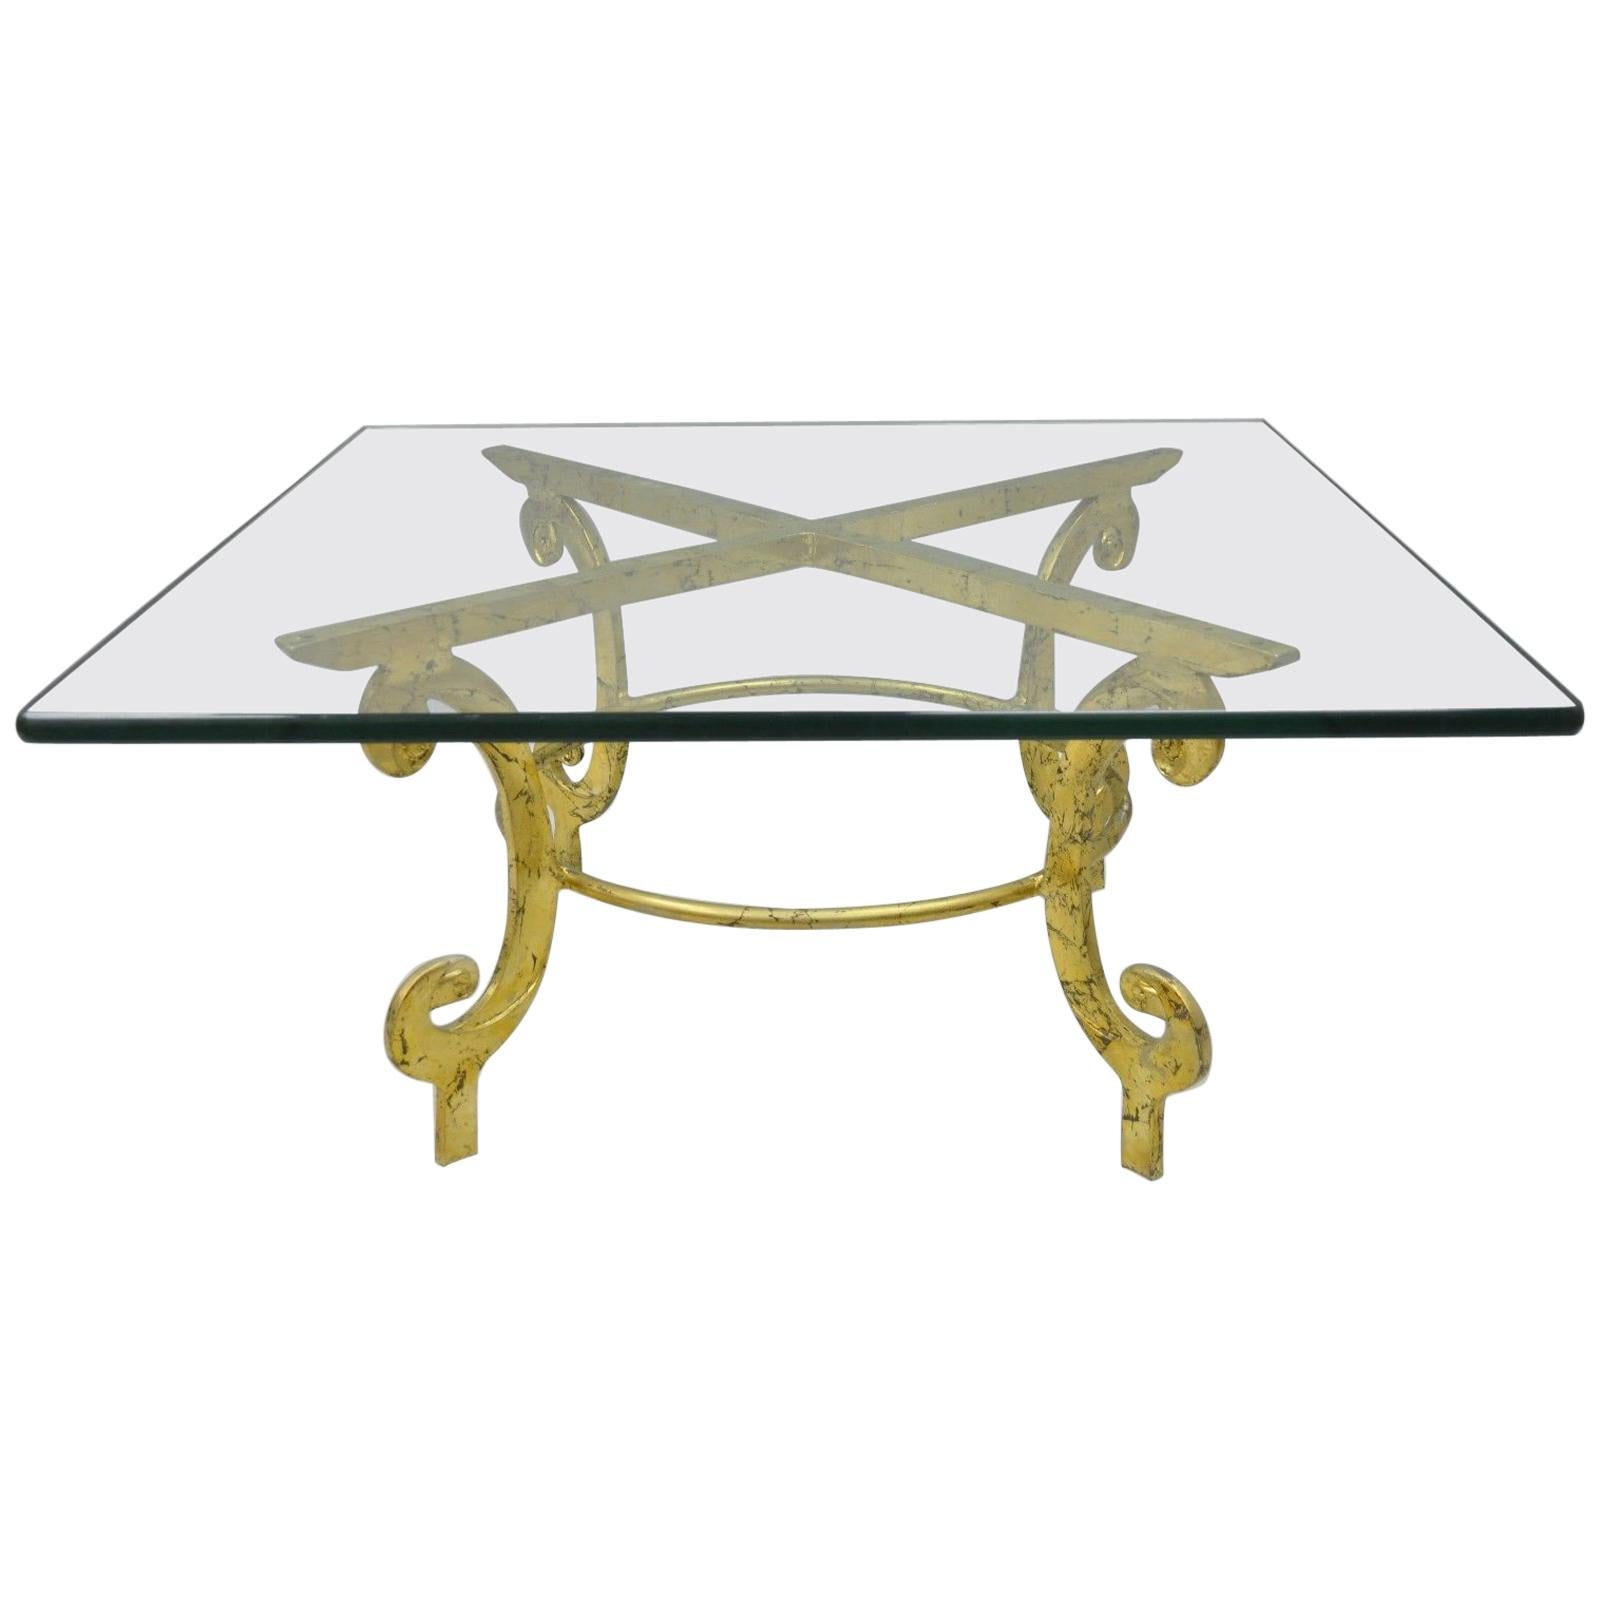 Vintage Gold Metal and Glass Italian Hollywood Regency Scrolling Coffee Table For Sale